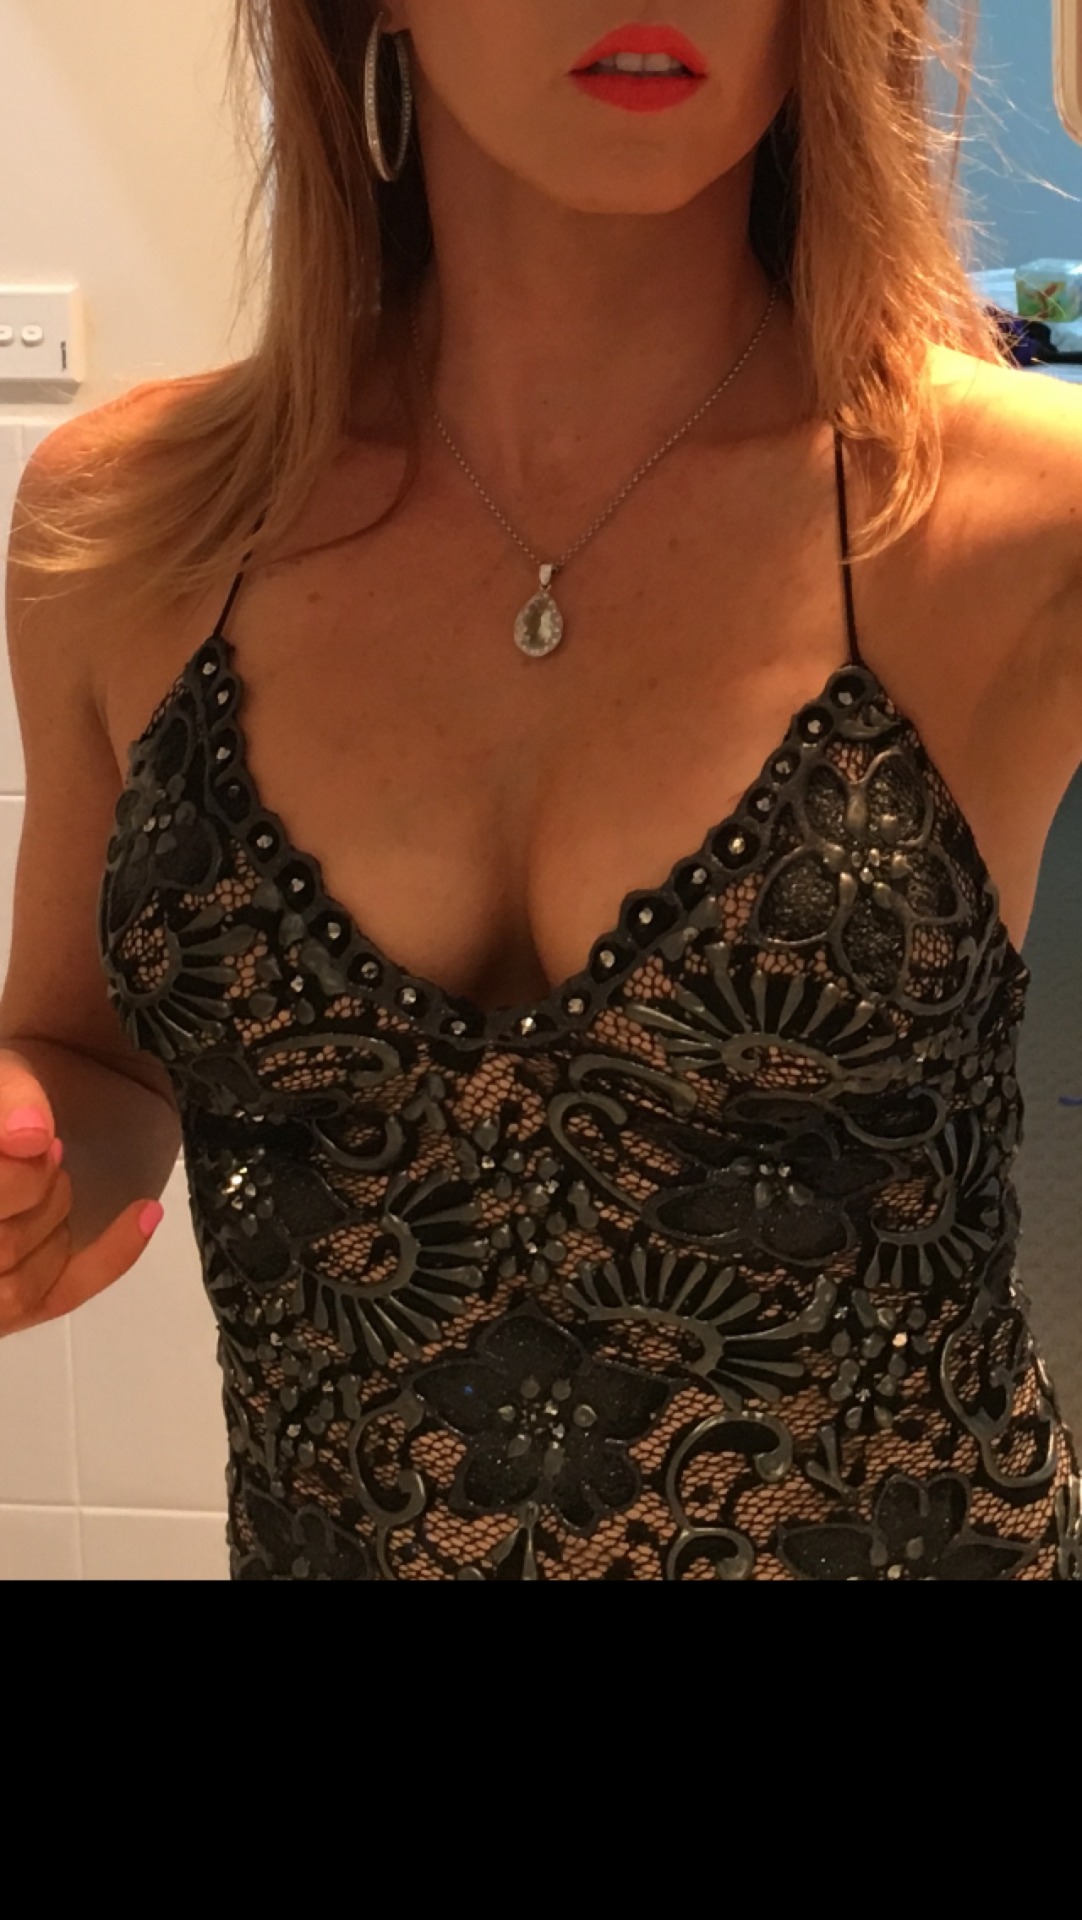 soccer-mom-marie:  Happy Braless Friday… No room for a bra in this dress 😉 